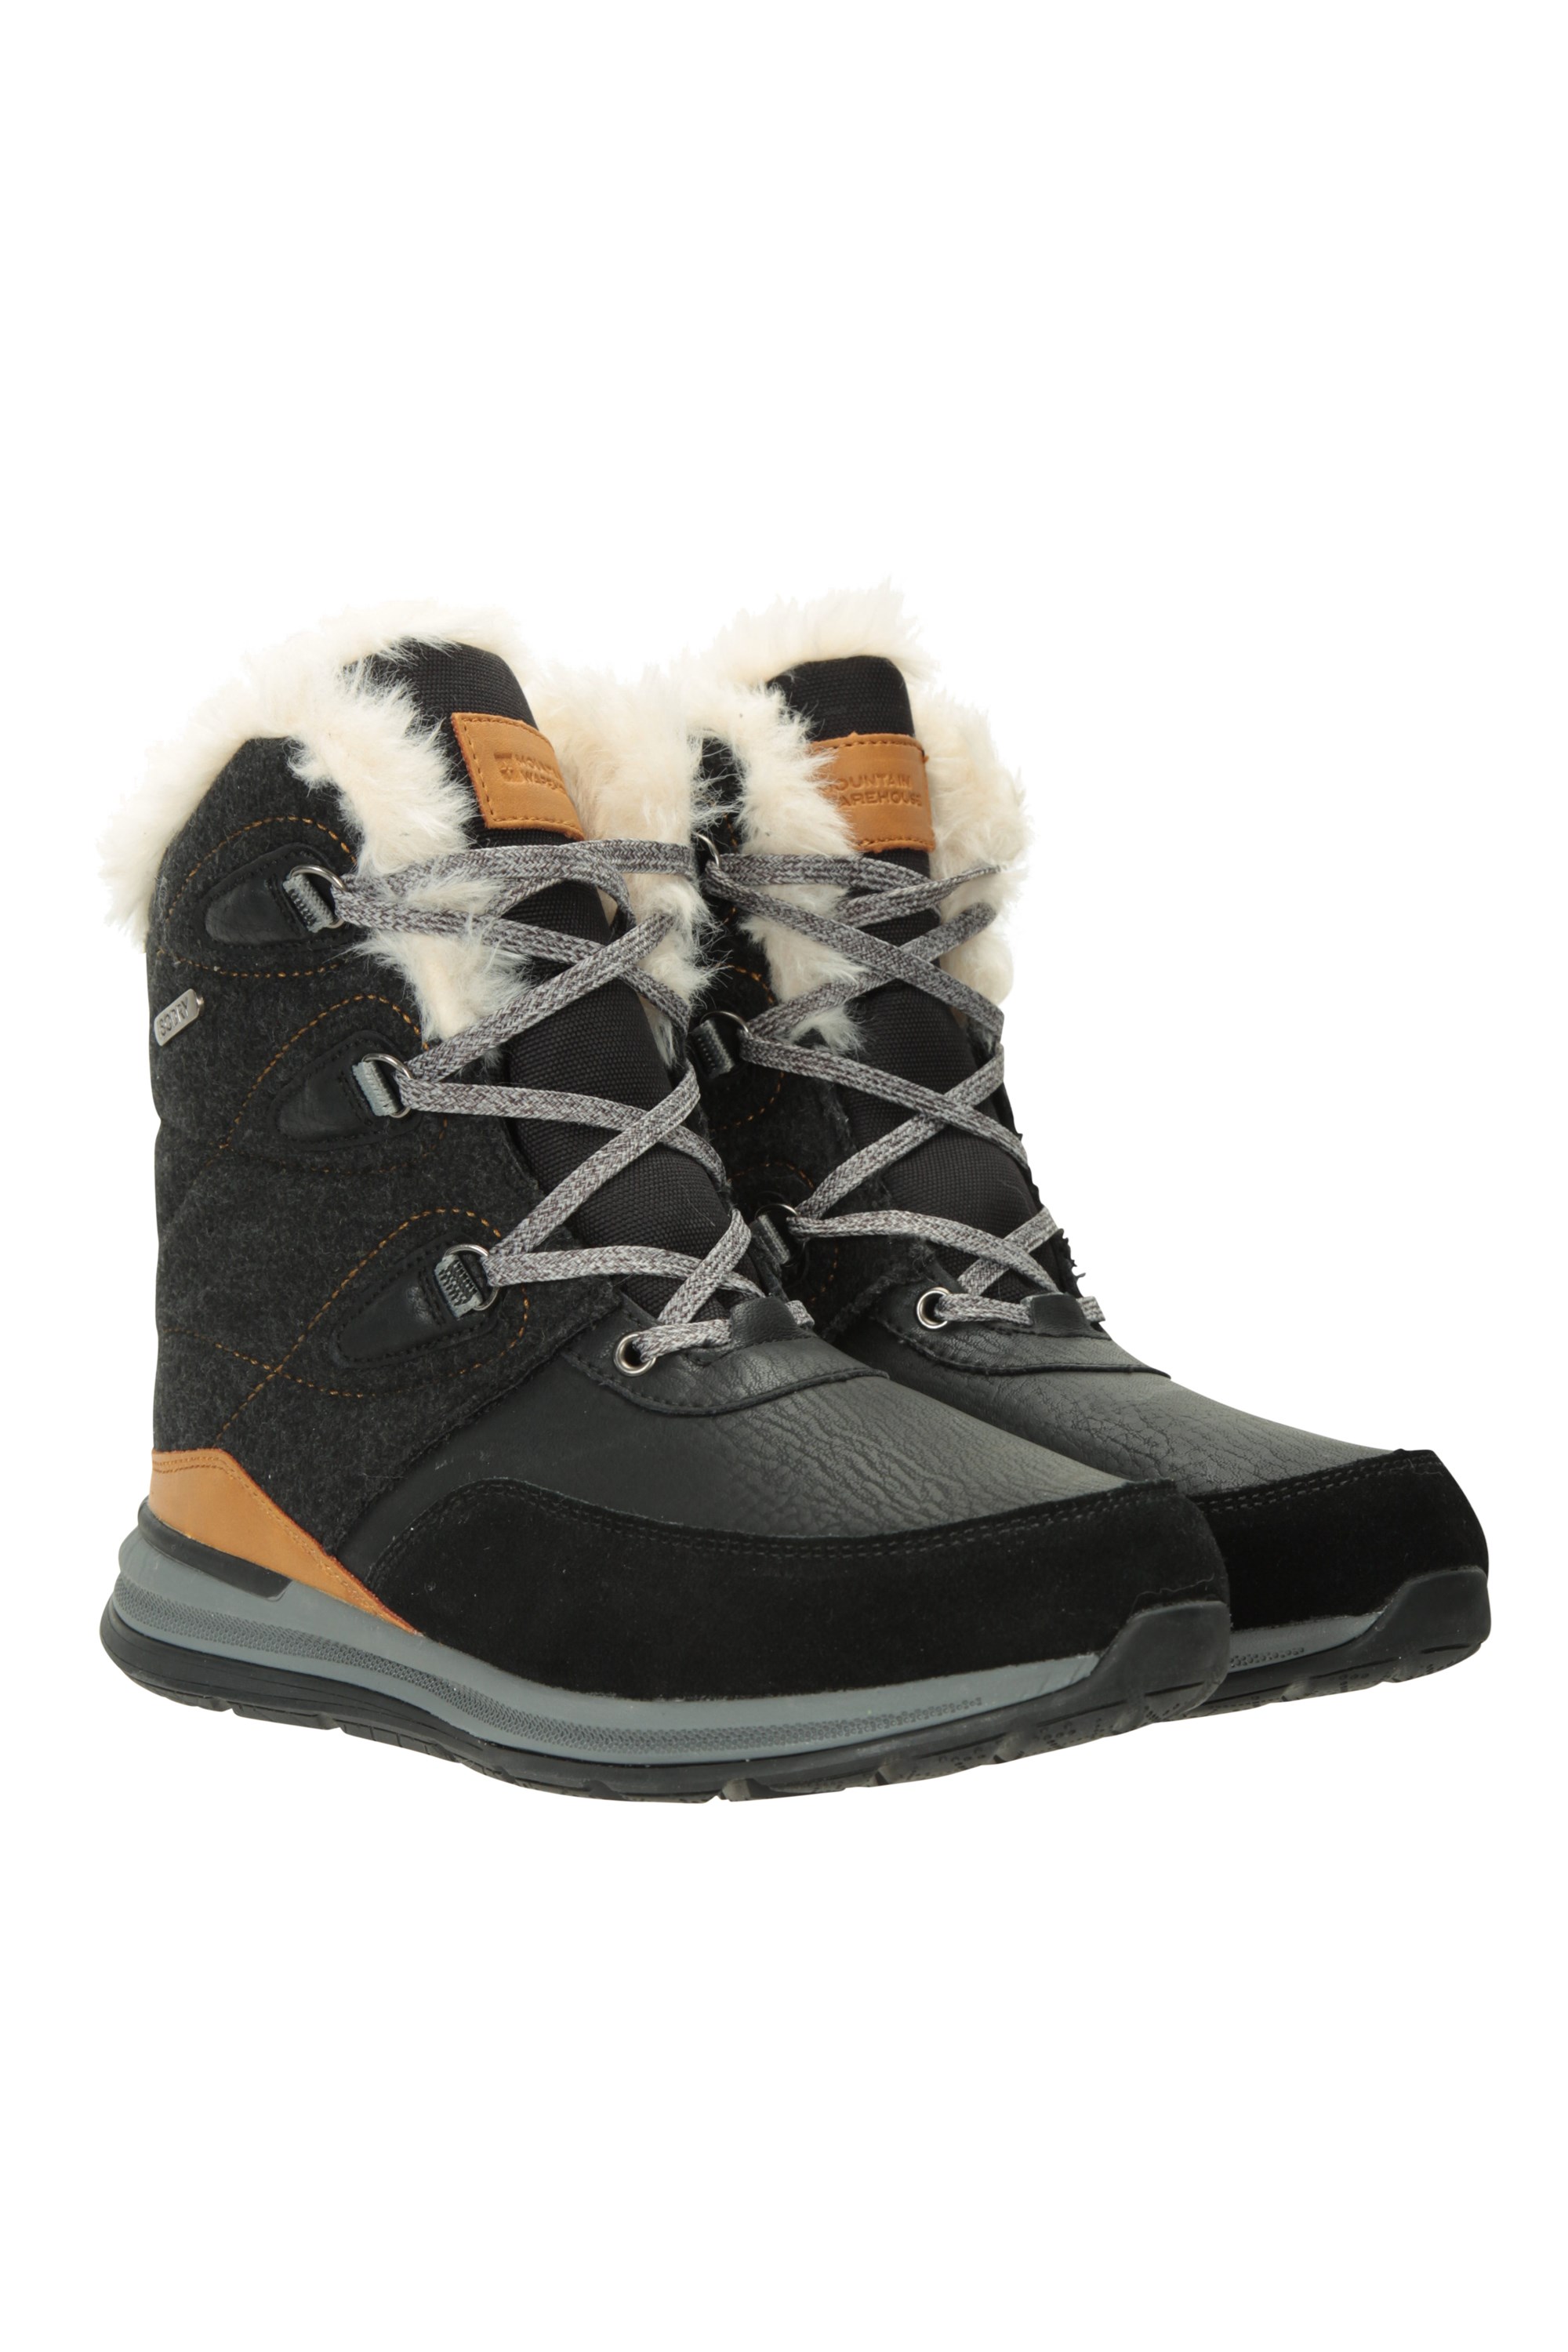 Mountain Warehouse Ice Peak High Snow Boot w/ Microfiber Lining and Suede Upper 